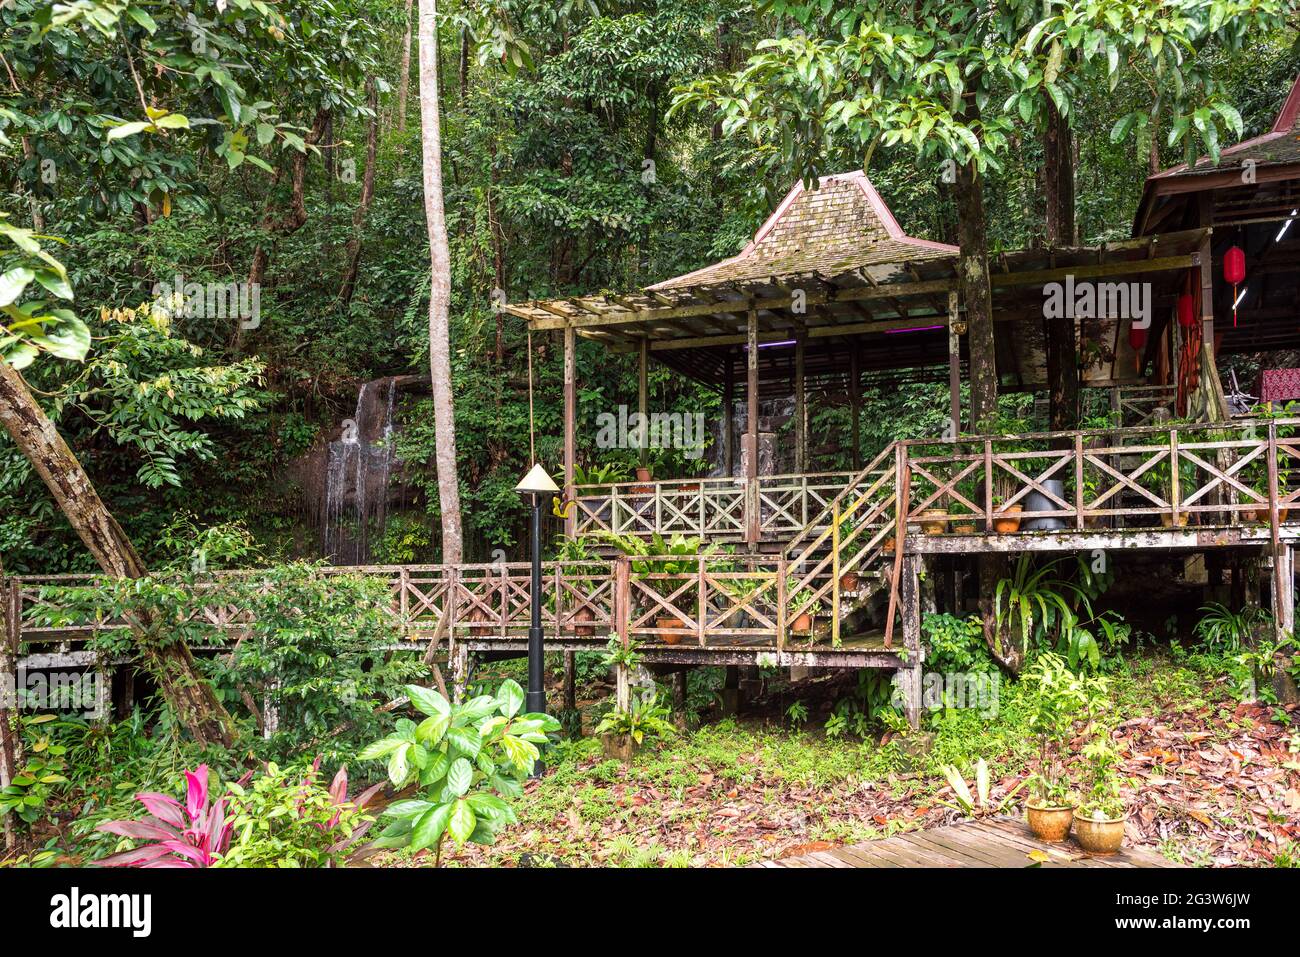 Gastronomy at the waterfall. Food and beverage in the Sarawak Cultural Village on Borneo Stock Photo